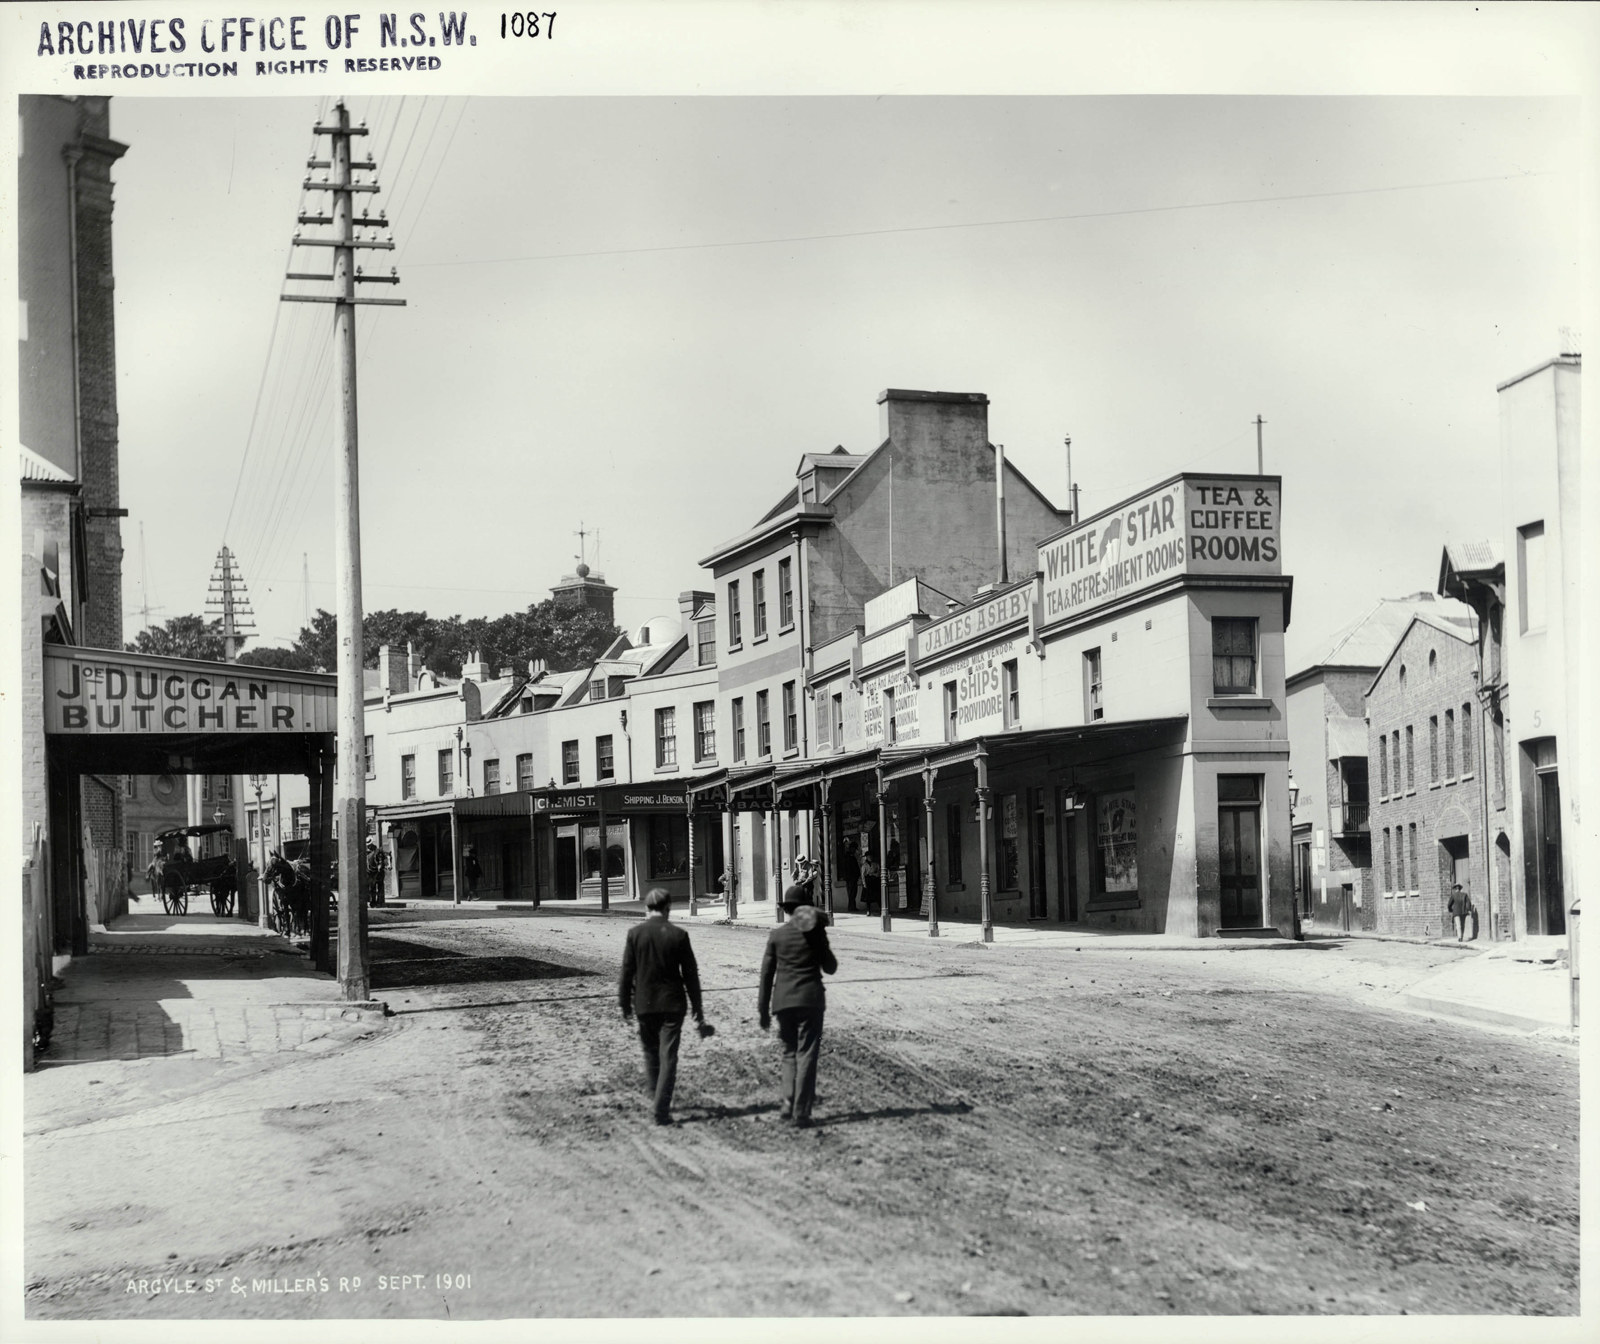 Photograph of street scene showing a row of two storey terraces. The street is lined by awnings indicating shops. Two men walk down the centre of the wide street.